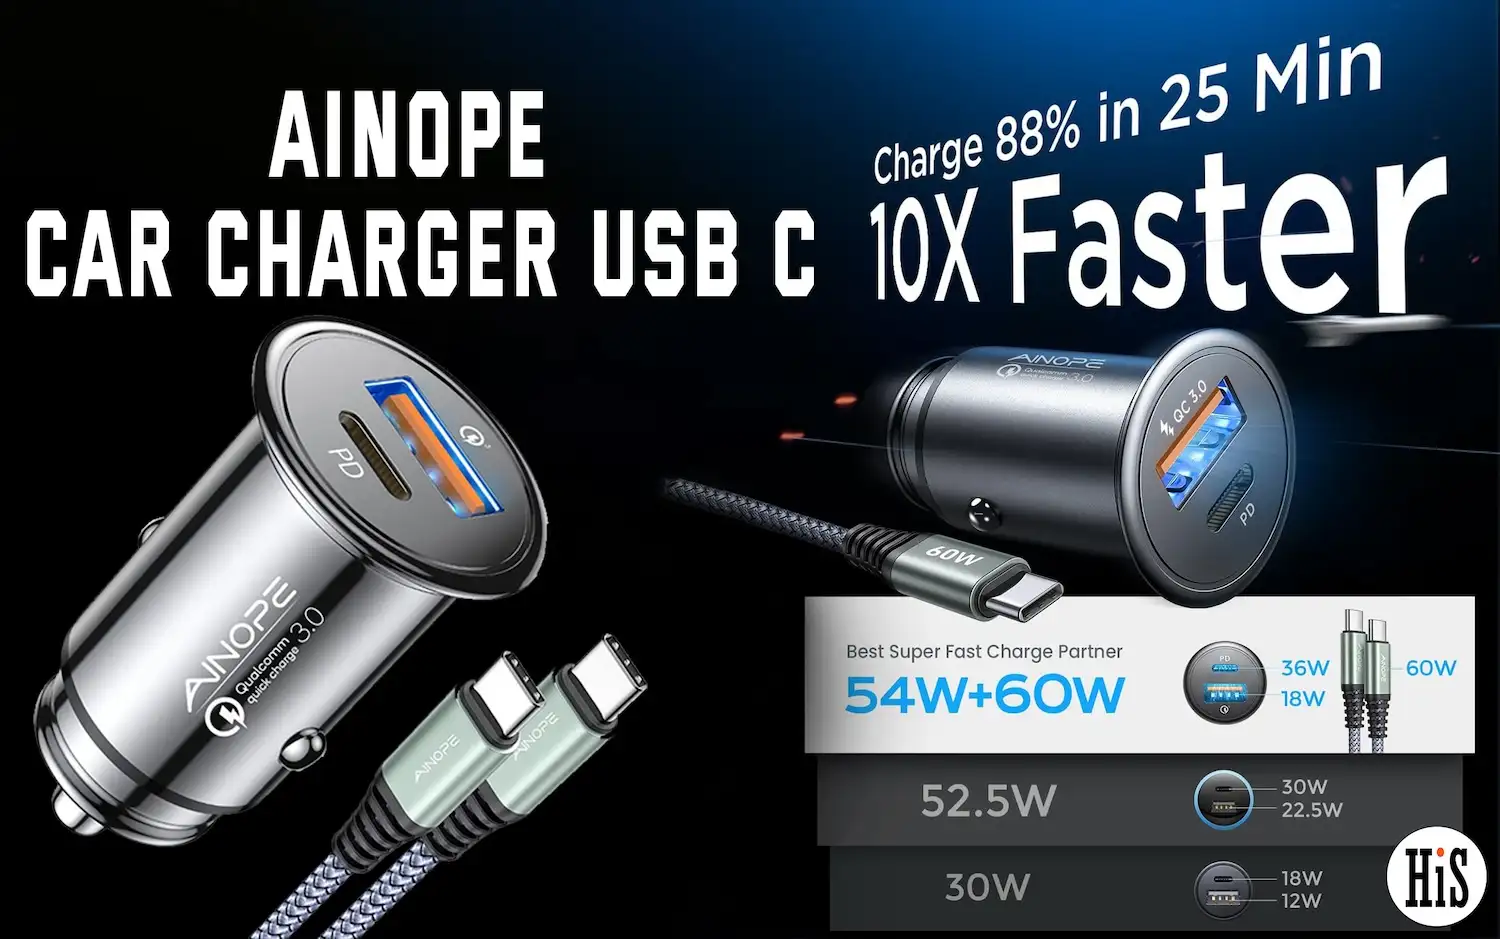 AINOPE Car Charger